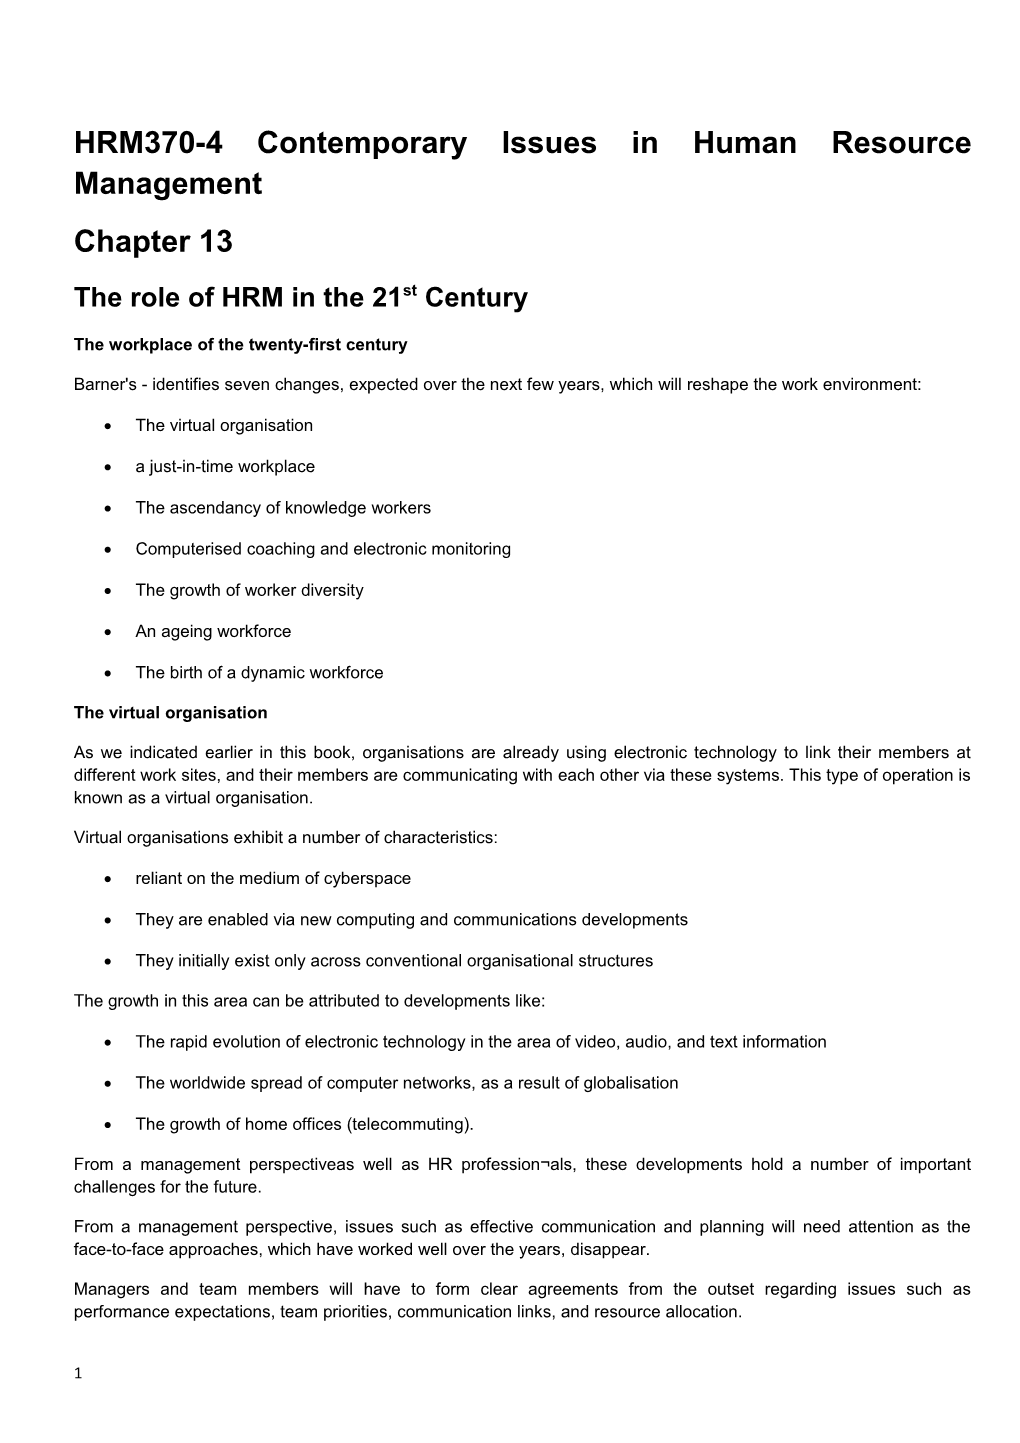 HRM370-4 Contemporary Issues in Human Resource Management